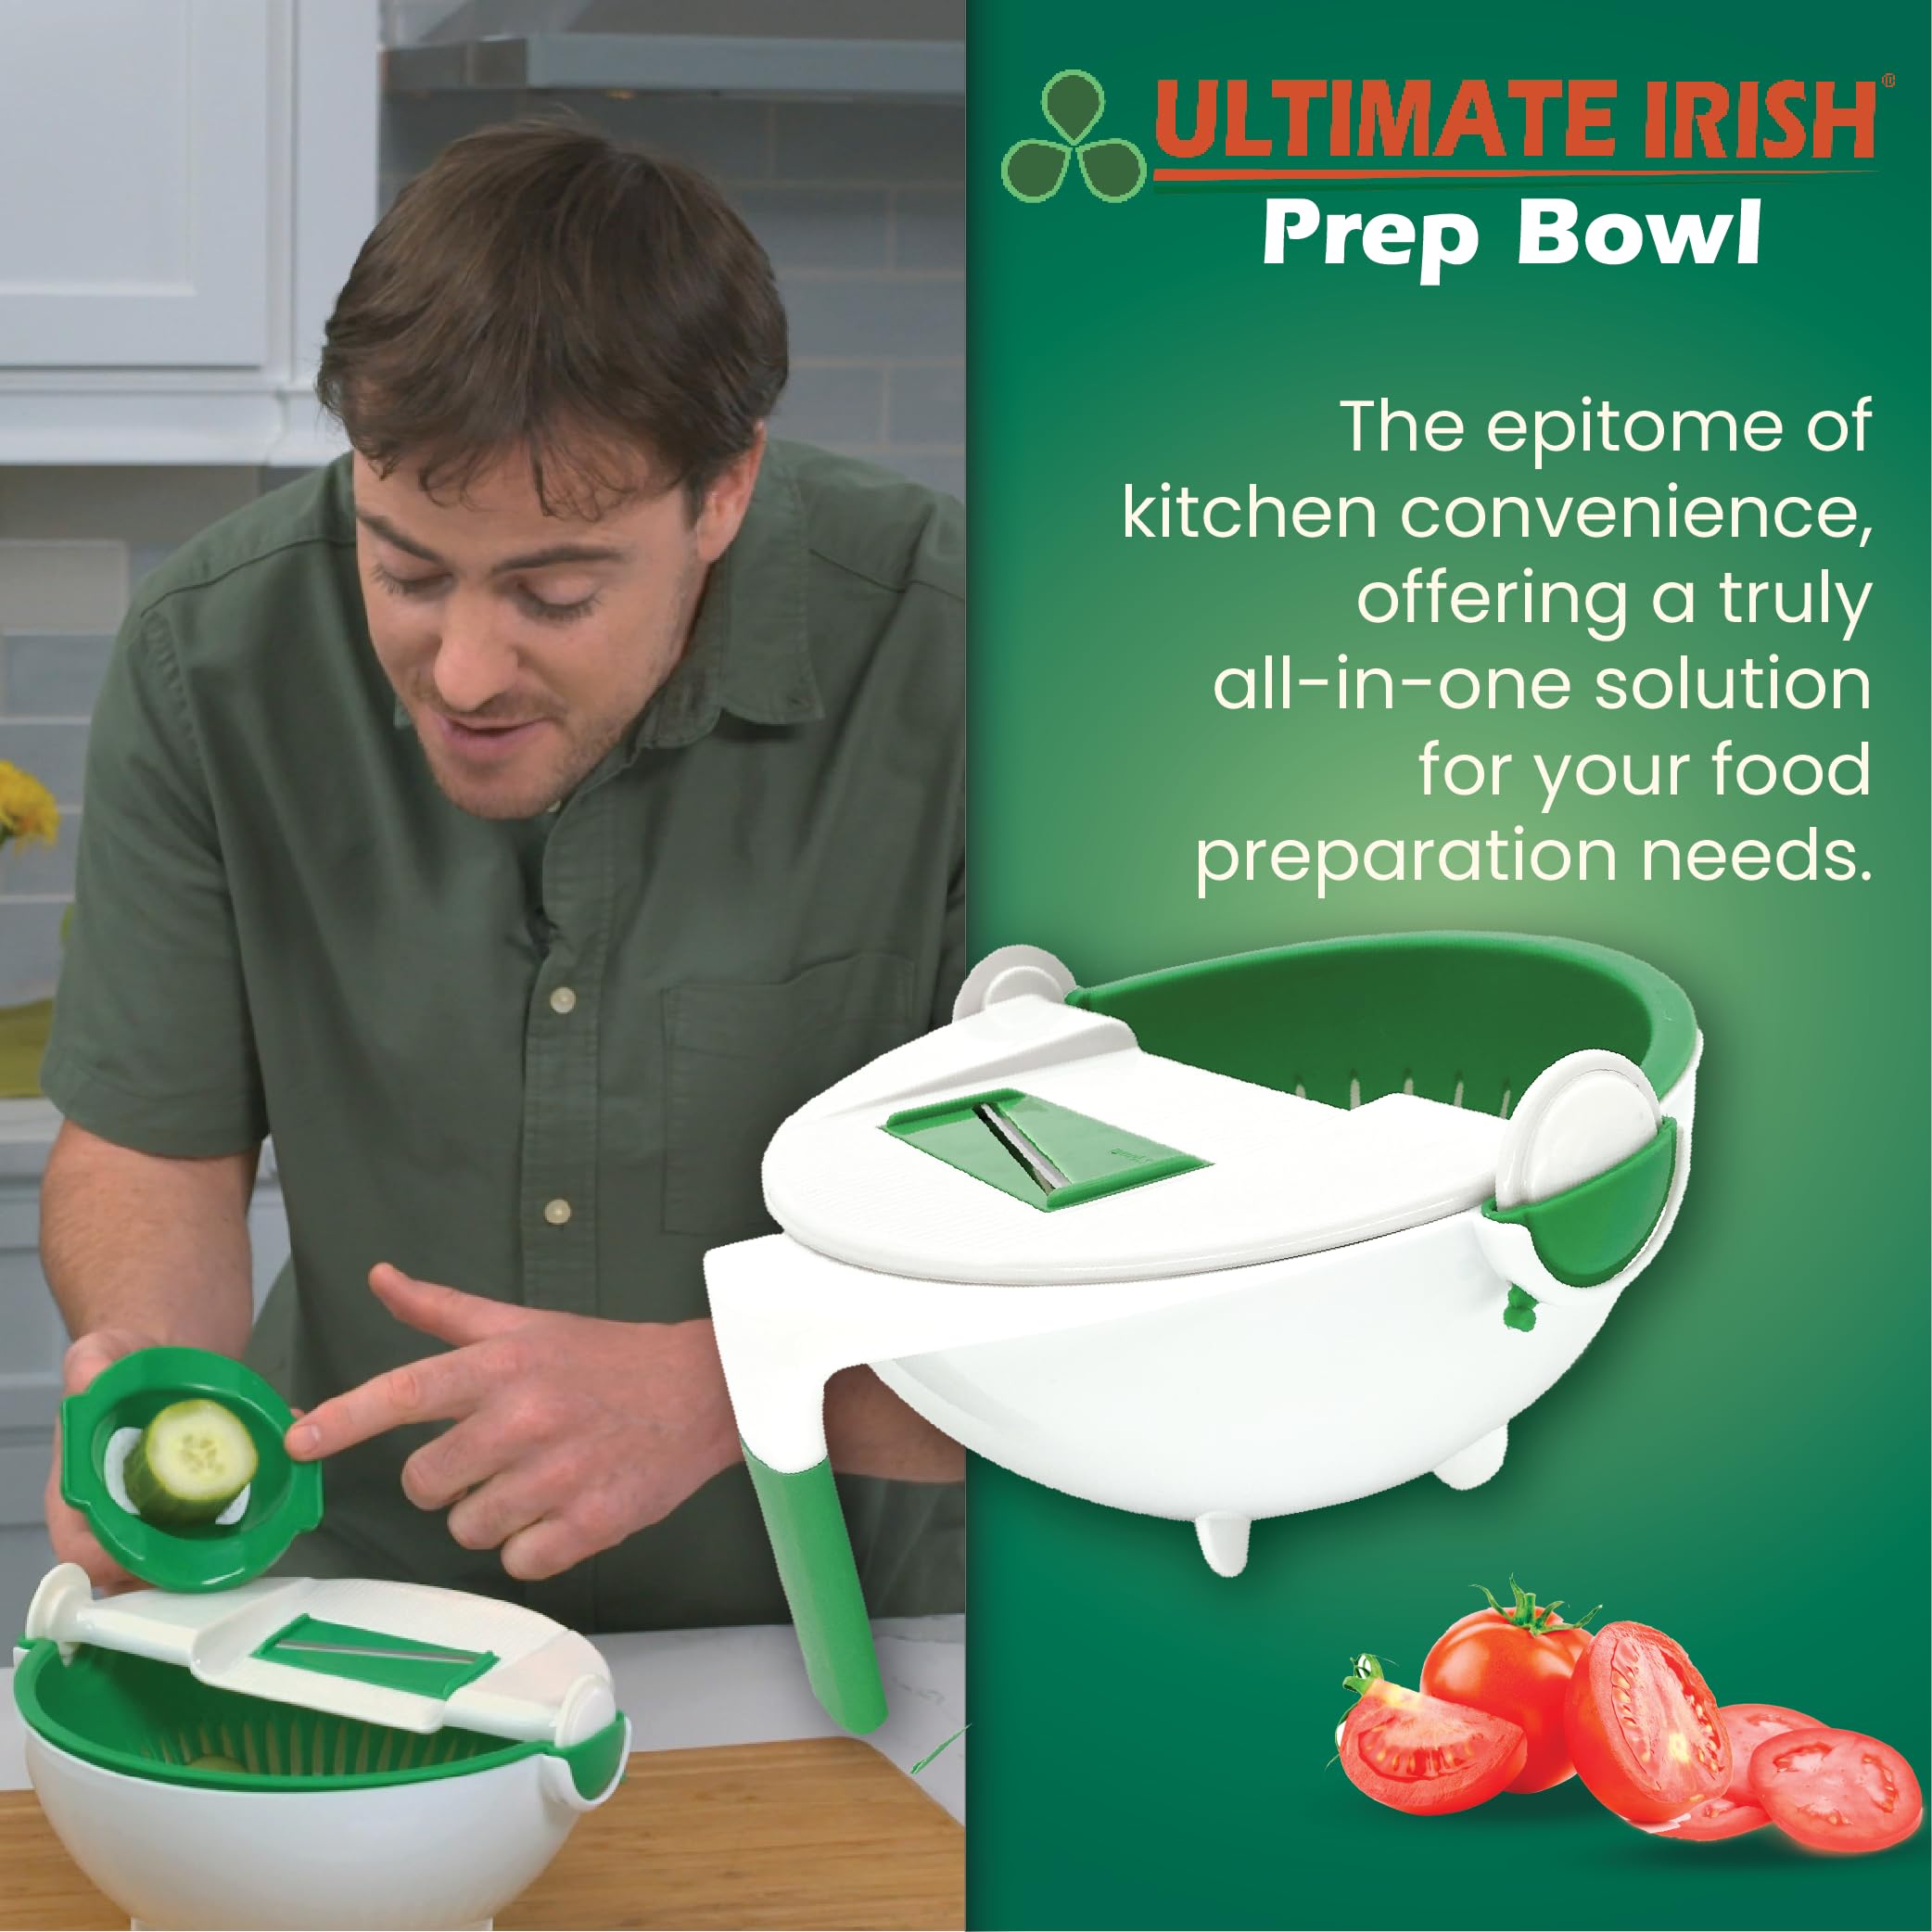 Ultimate Irish Prep Bowl - Ronnie Neville’s Original as Seen on TV Salad Preparation and Rinsing Bowl, Vegetable Slicer Salad Maker Kitchen Tools to Shred/Slice/Rinse, Kitchen Tool Salad Cutter Bowl